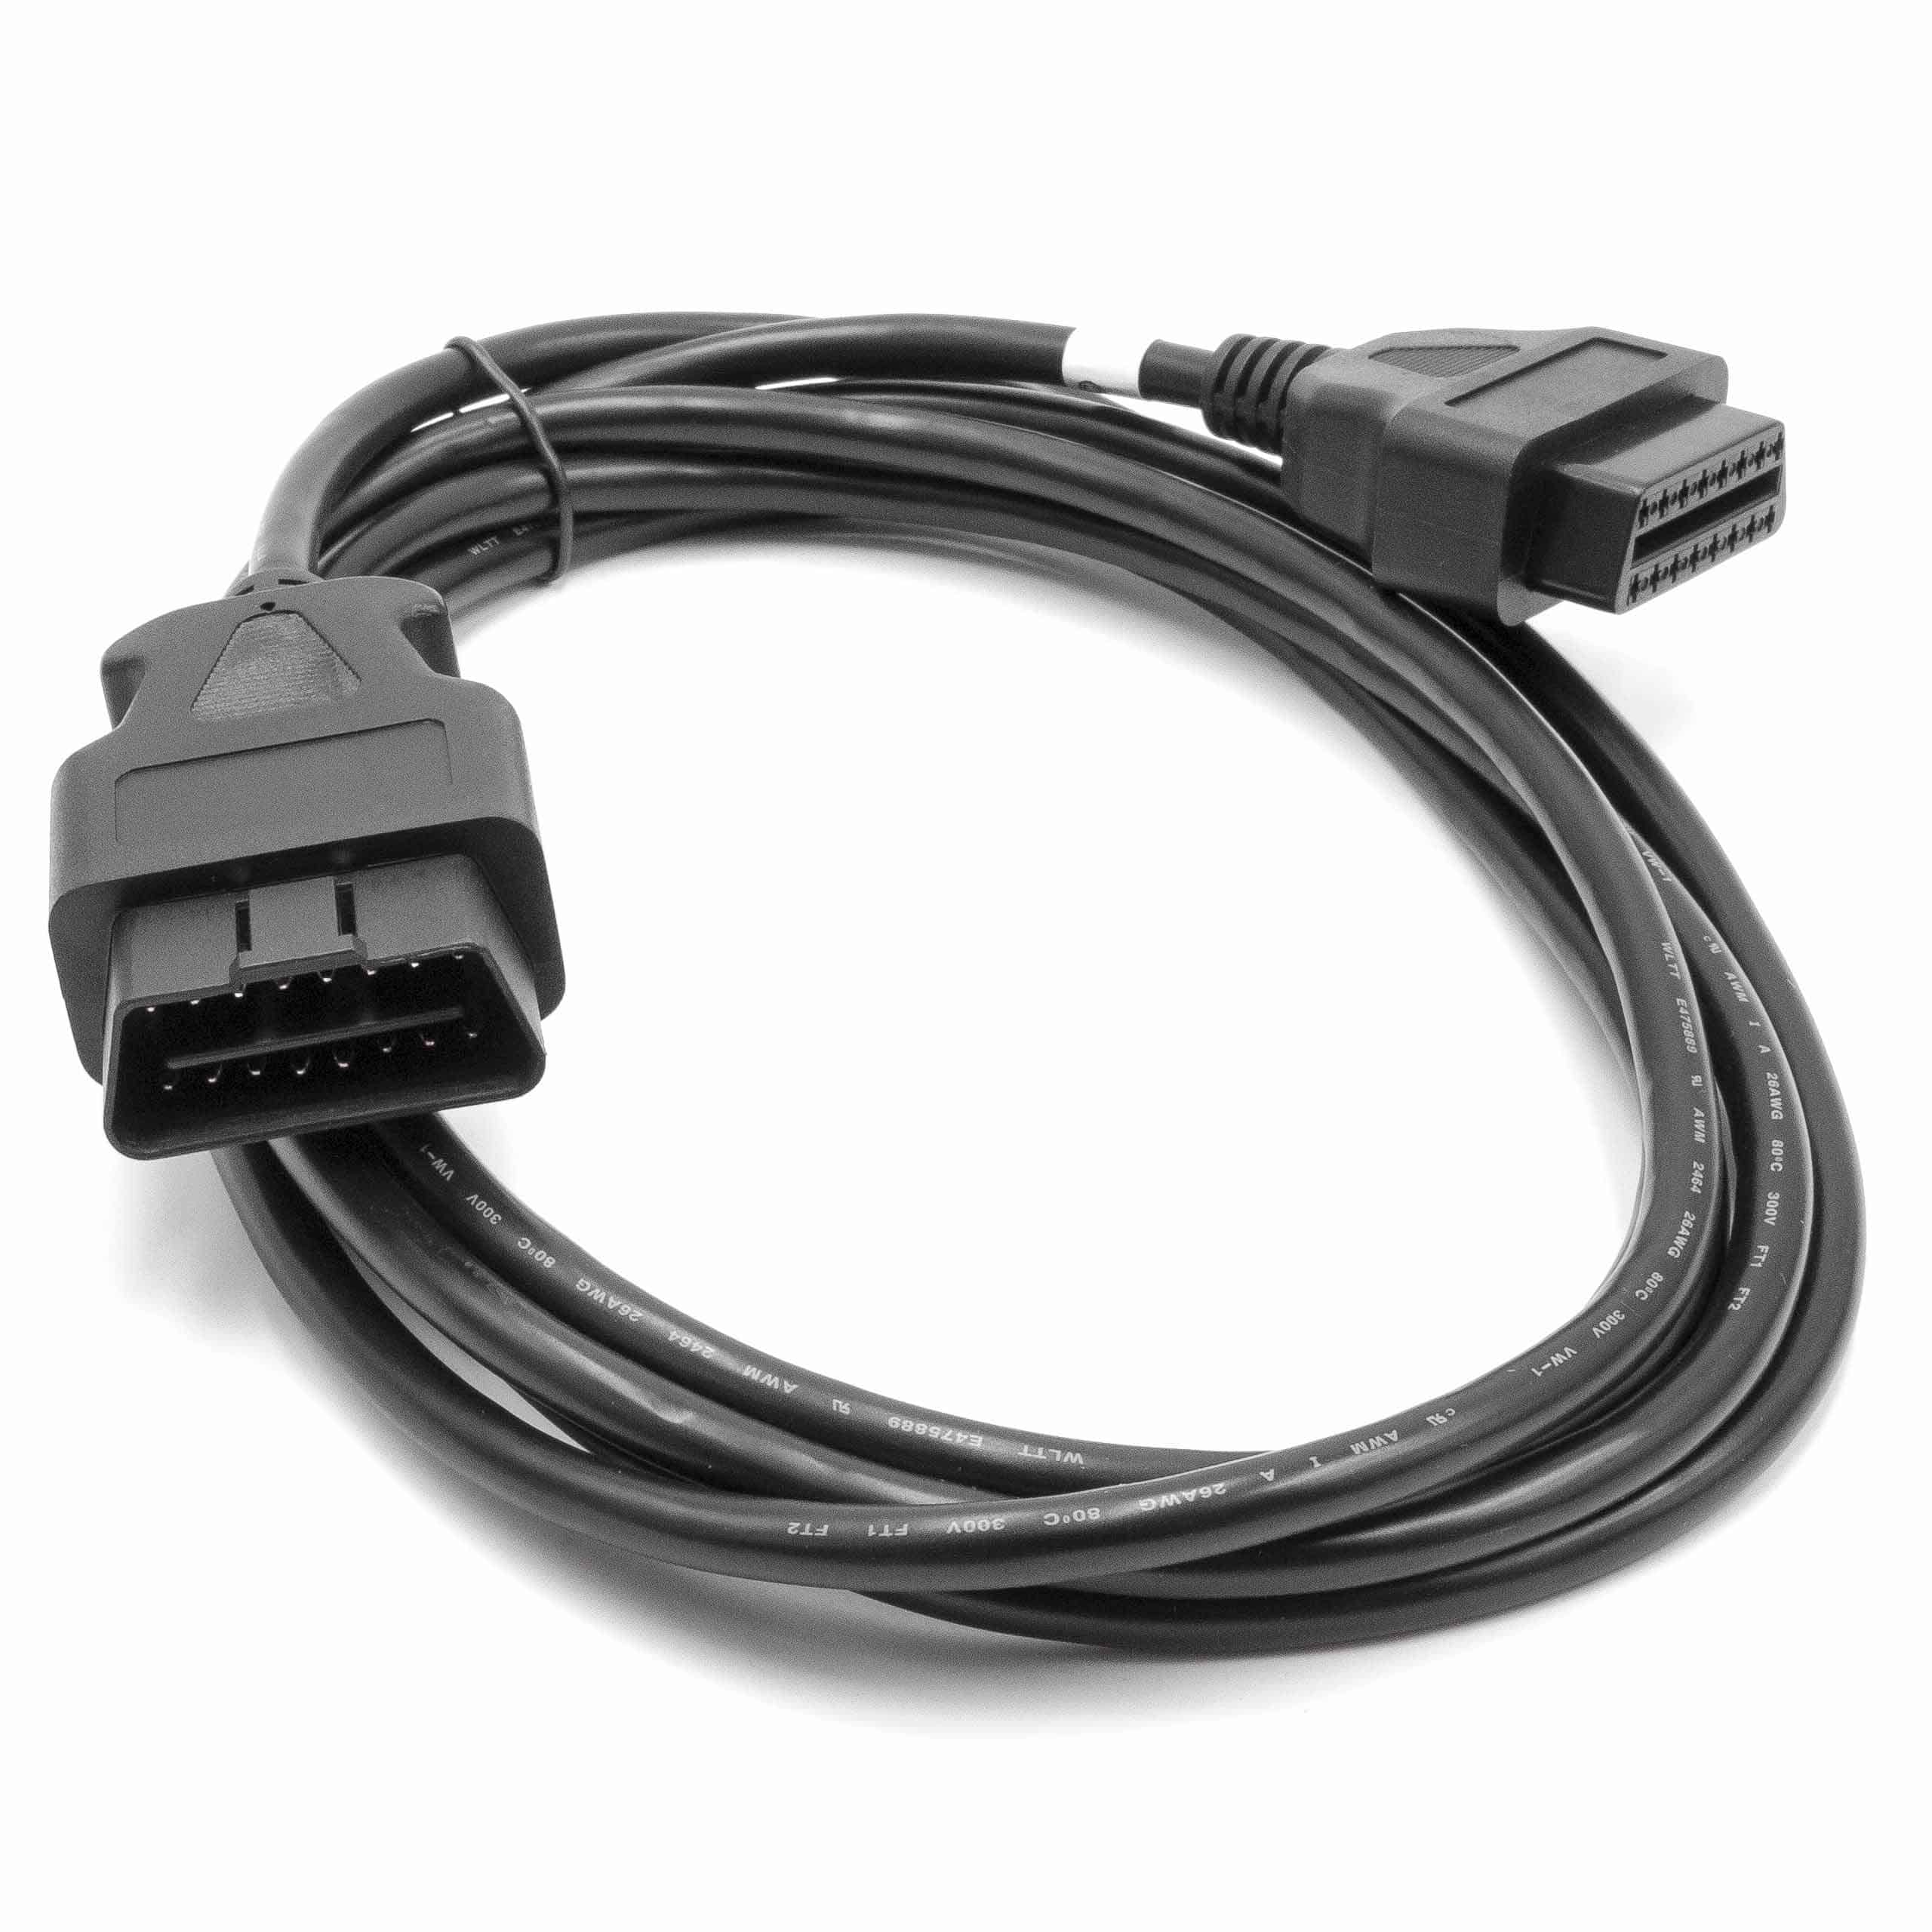 vhbw OBD2 Extension Cable 16 Pin (f) to 16 Pin (m) for Vehicle - 300 cm